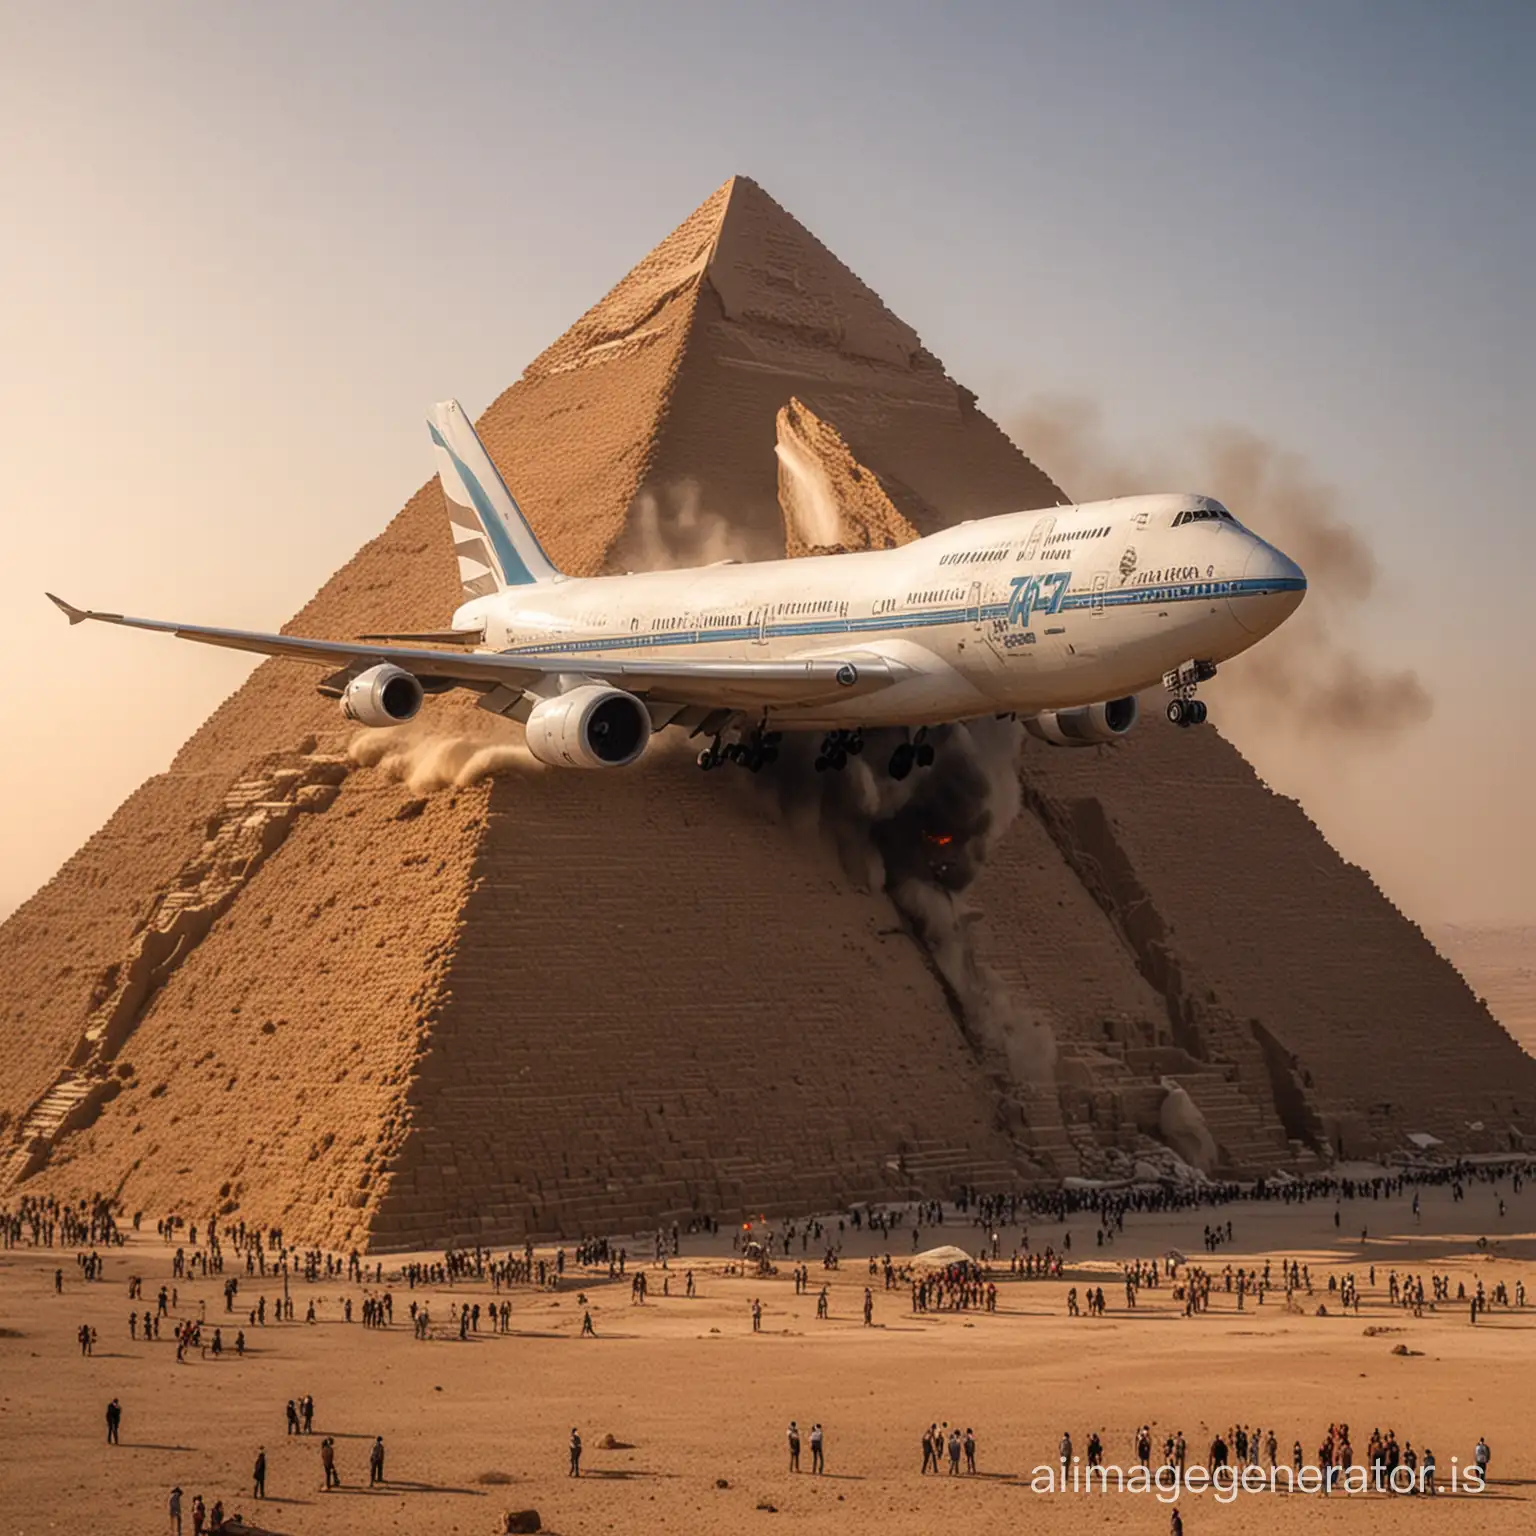 accident of a boeing 747 hitting an Egyptian pyramid